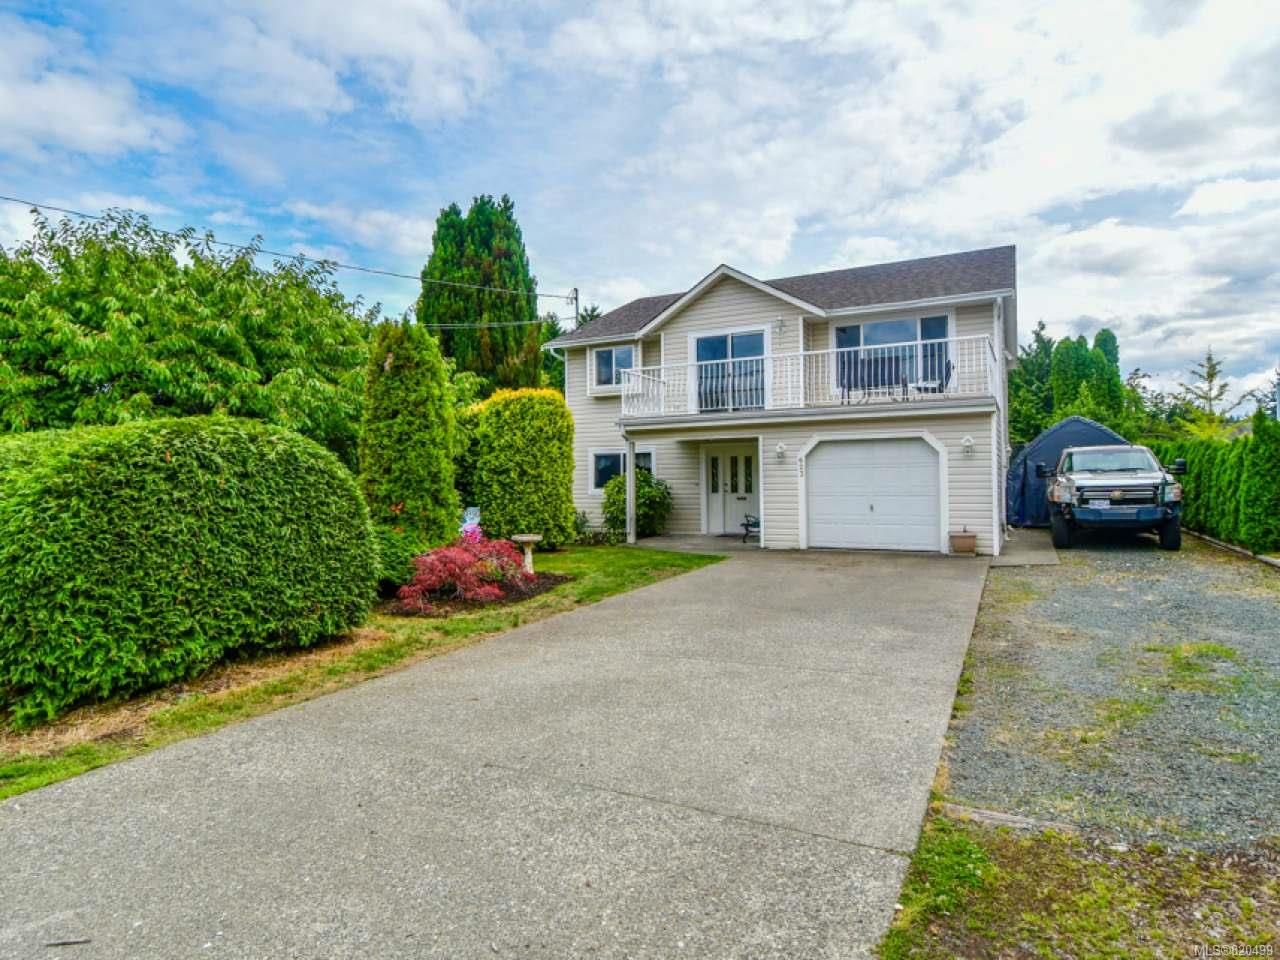 Main Photo: 623 Holm Rd in CAMPBELL RIVER: CR Willow Point House for sale (Campbell River)  : MLS®# 820499